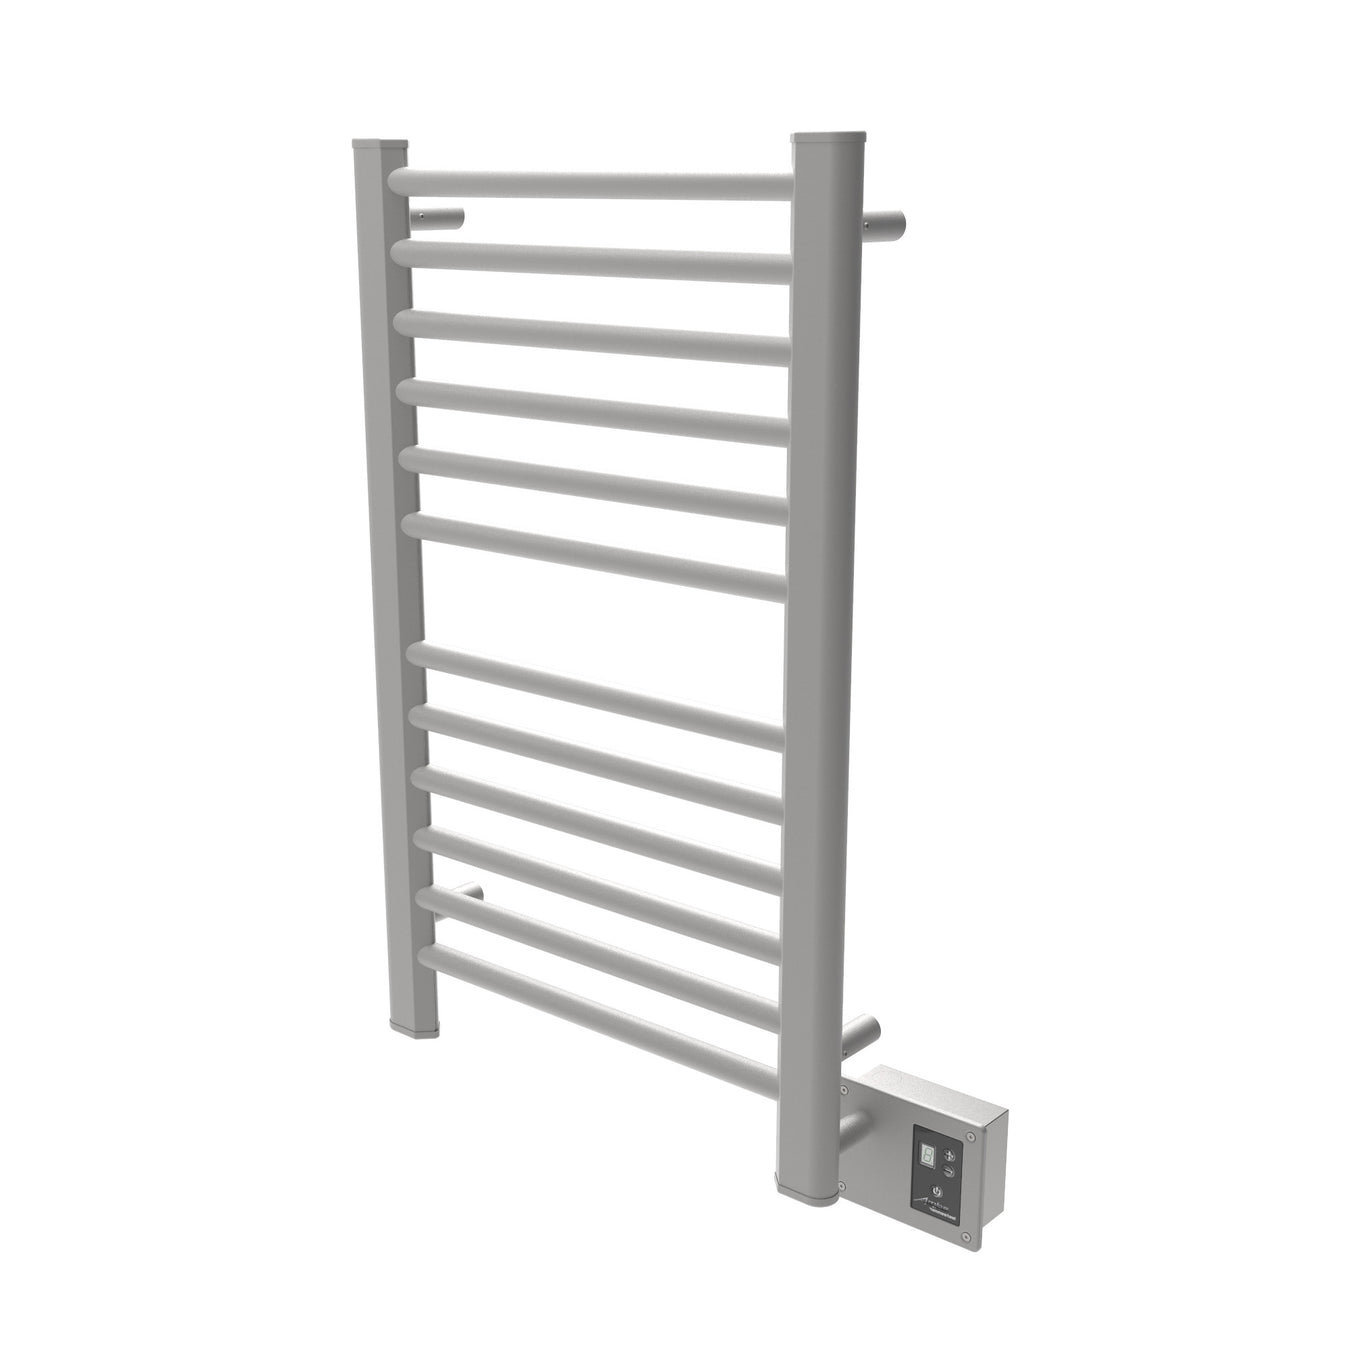 Amba Products Sirio Collection S2133 Towel Warmers